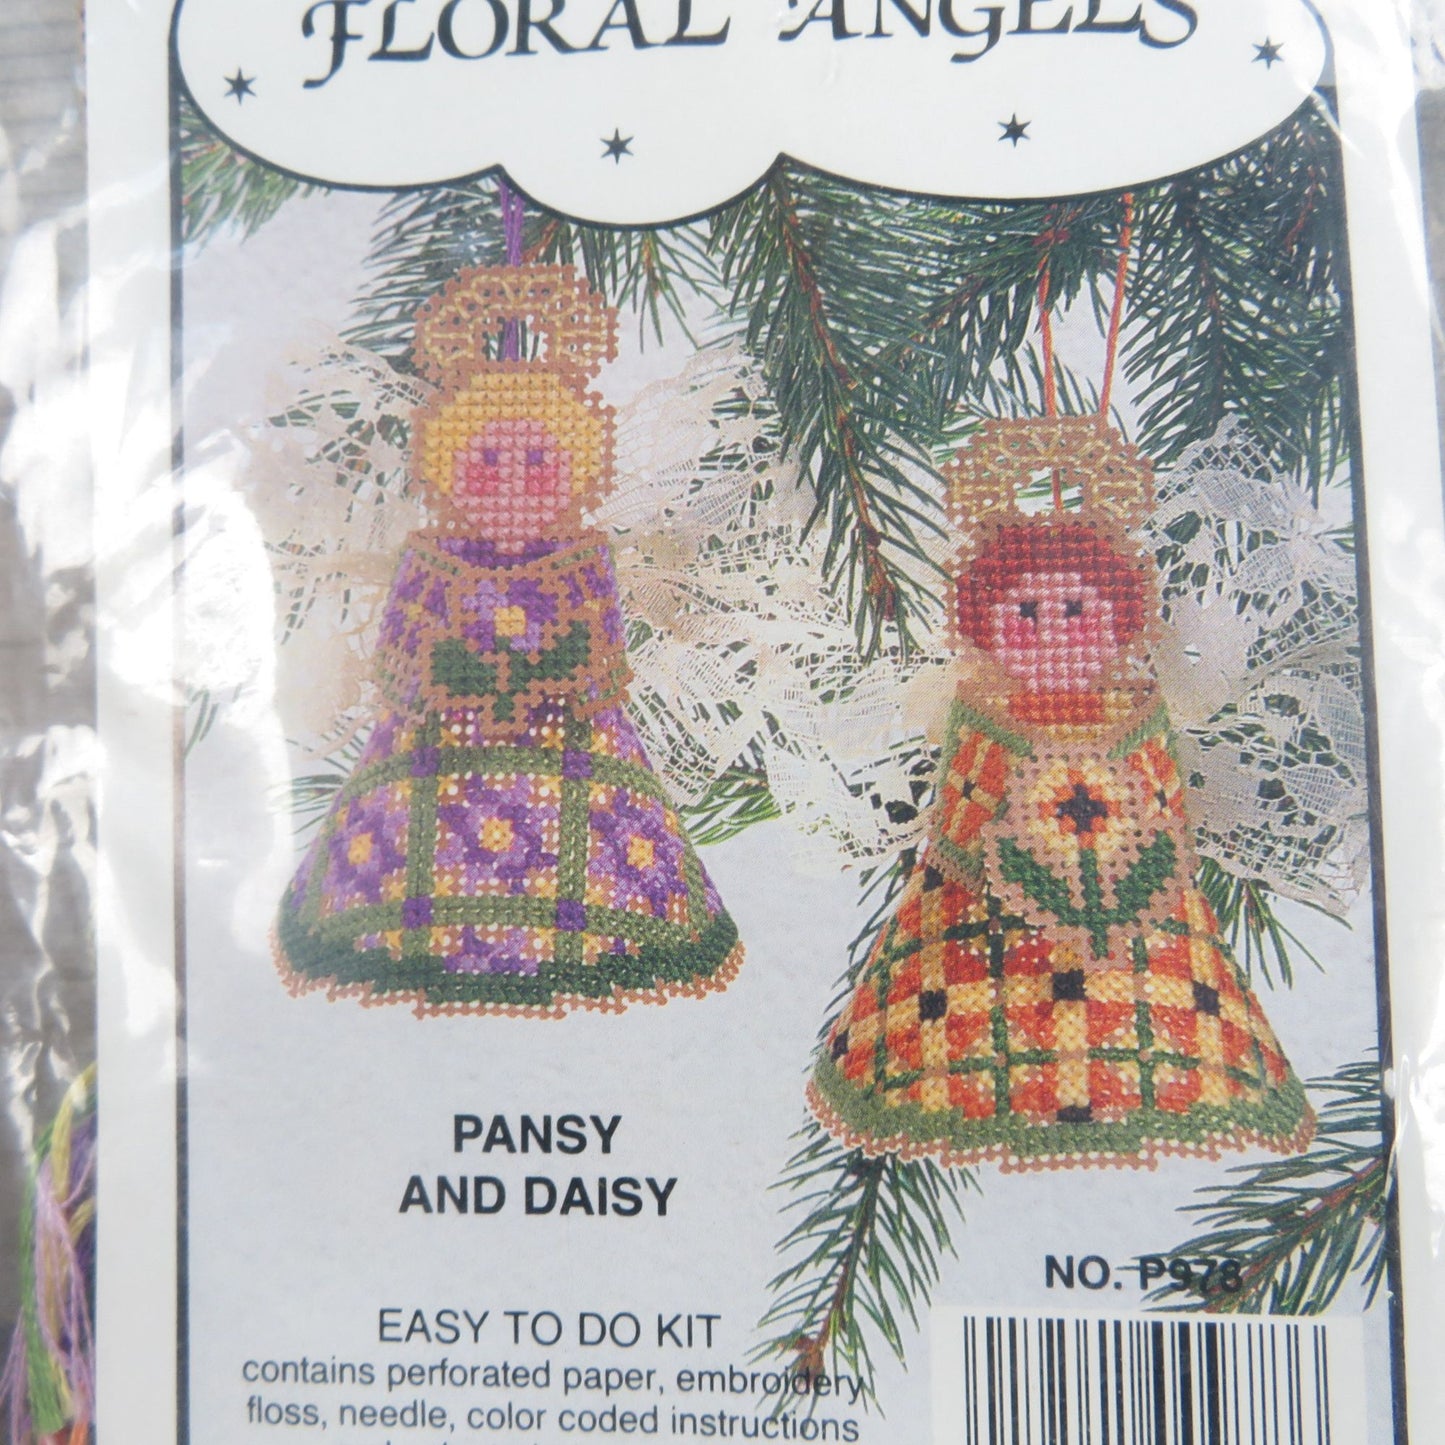 Cross Stitch Ornament Kit Christmas Floral Angels Pansy Daisy Willmaur Crafts